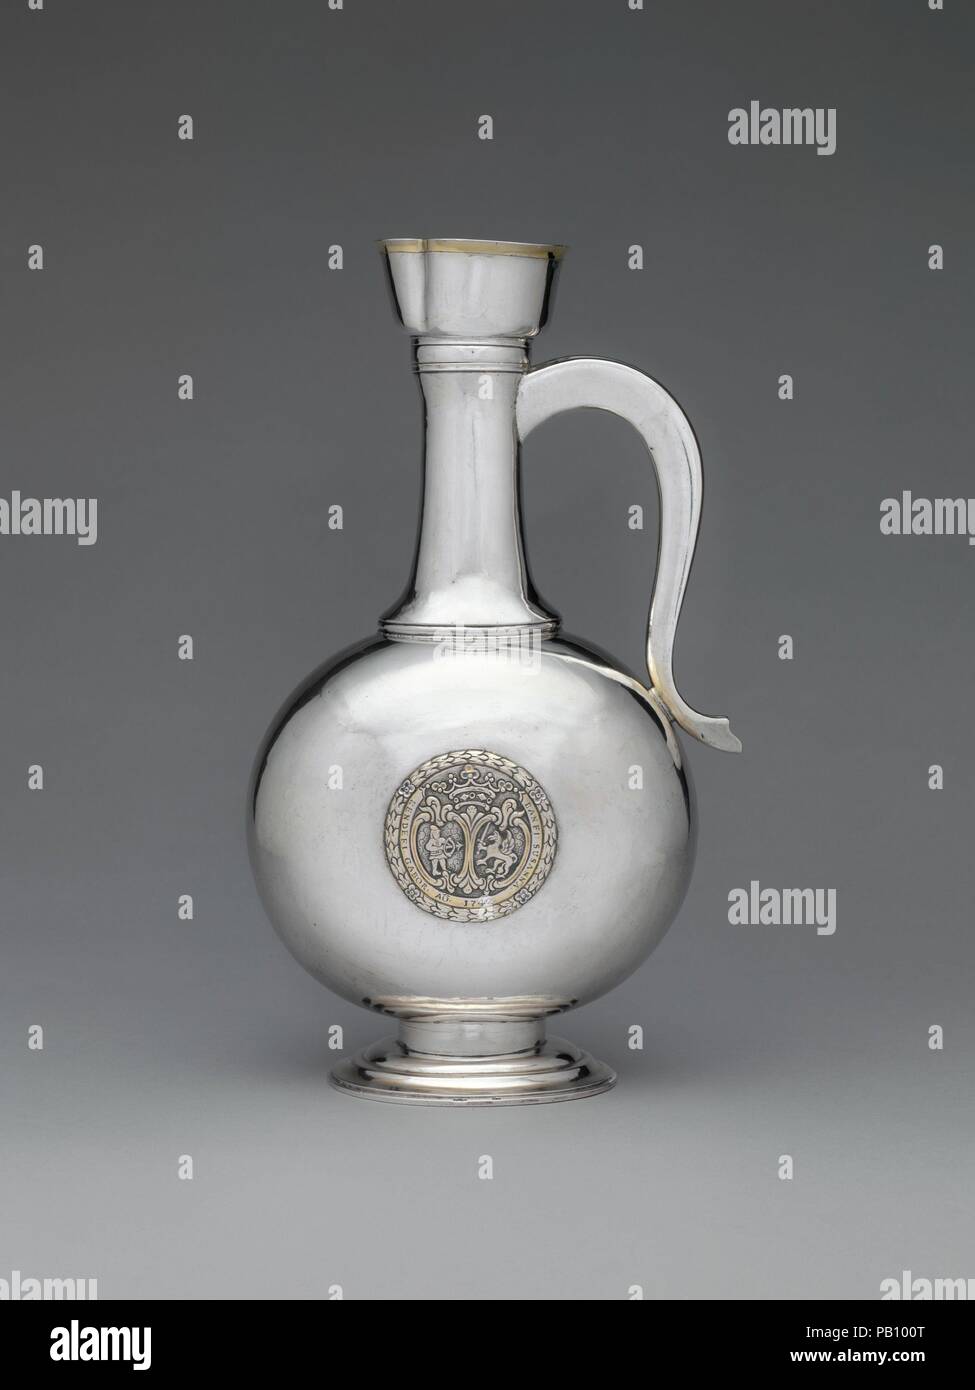 Wine decanter. Culture: Hungarian, Kolozsvár. Dimensions: Overall: 12 13/16 x 4 7/16 in. (32.5 x 11.2 cm). Maker: Johannes Szakáll (active 1748-72). Date: 1779.  The goldsmith designed this innovative, even forward-looking, vessel to serve mulled wine, a popular spiced drink. The beverage was prepared by placing spices on the slightly funnel-shaped filter of the decanter and then pouring hot wine over them. The inscriptions on the medallions applied to either side of the flattened round body may refer to two weddings. One inscription, G. BETHLEN GERGELY/G. KENDEFFI RACHEL/1779, may mark the un Stock Photo